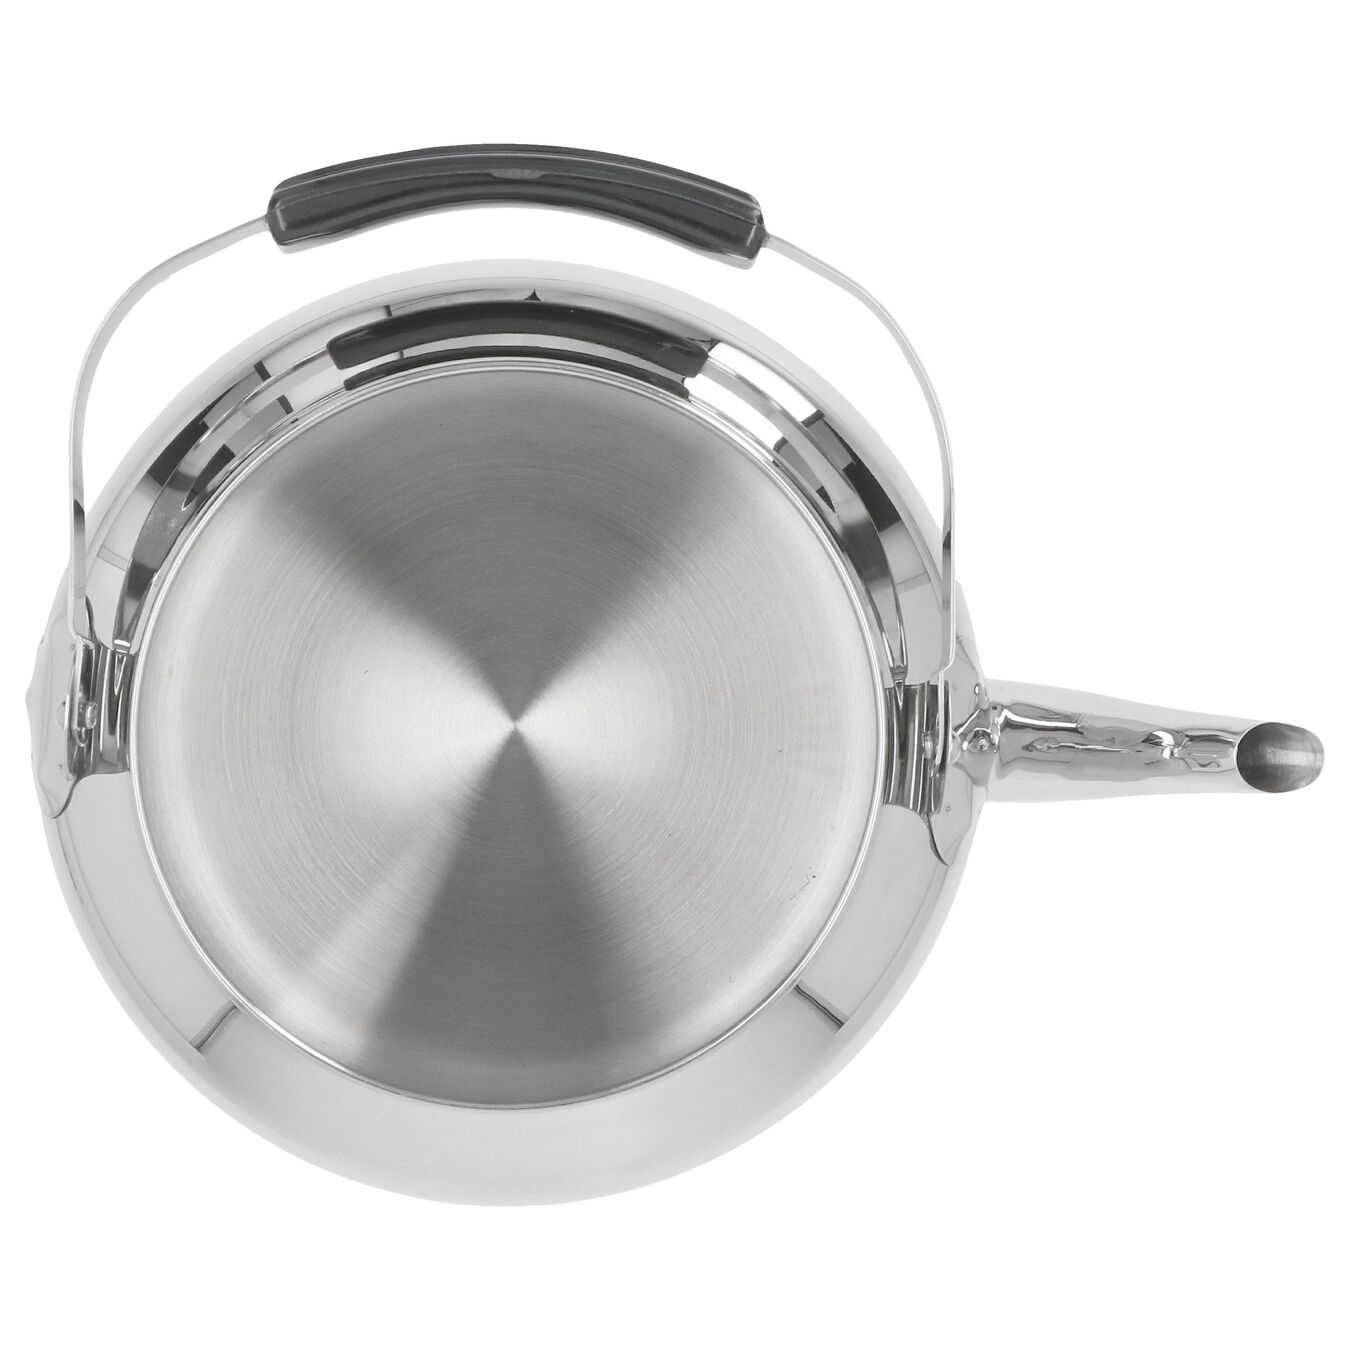 6.25 qt Tea Kettle, 18/10 Stainless Steel ,,large 5